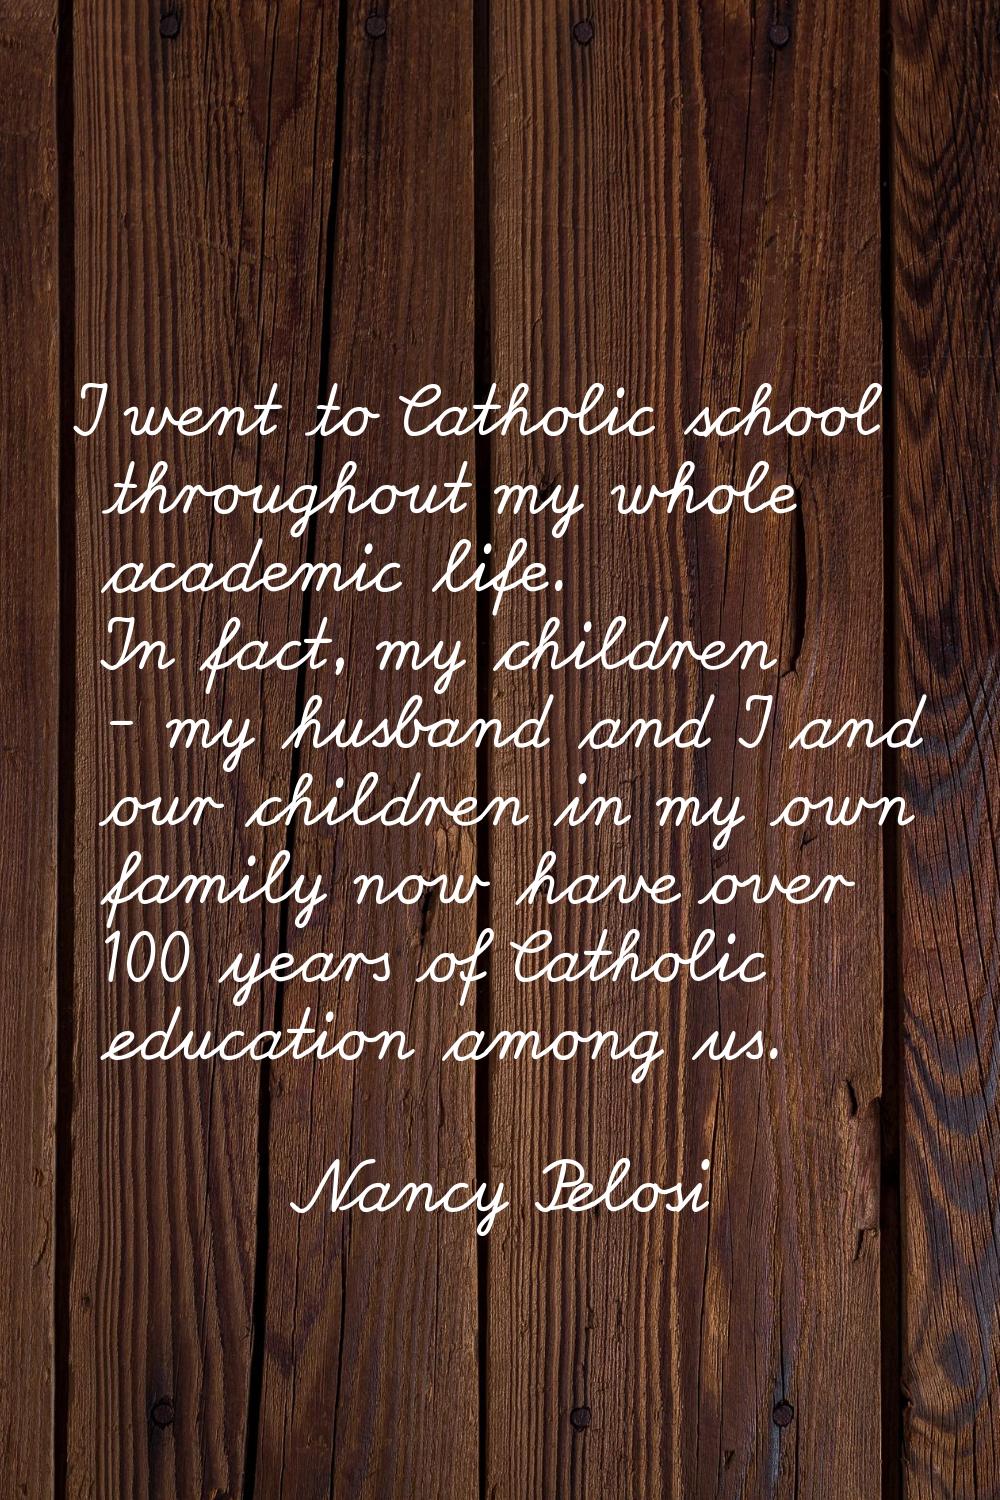 I went to Catholic school throughout my whole academic life. In fact, my children - my husband and 